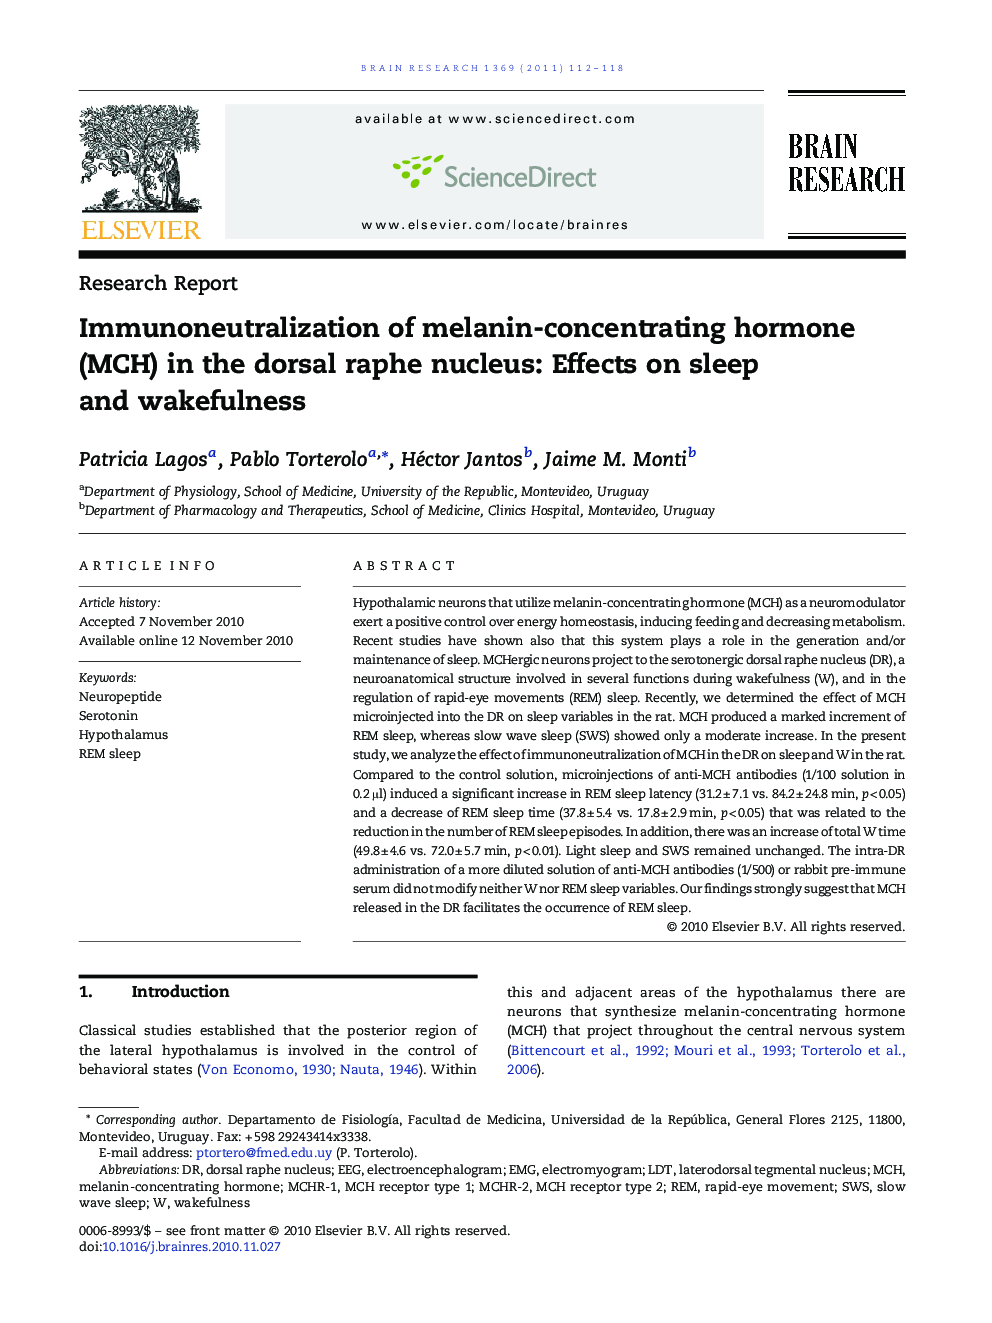 Research ReportImmunoneutralization of melanin-concentrating hormone (MCH) in the dorsal raphe nucleus: Effects on sleep and wakefulness